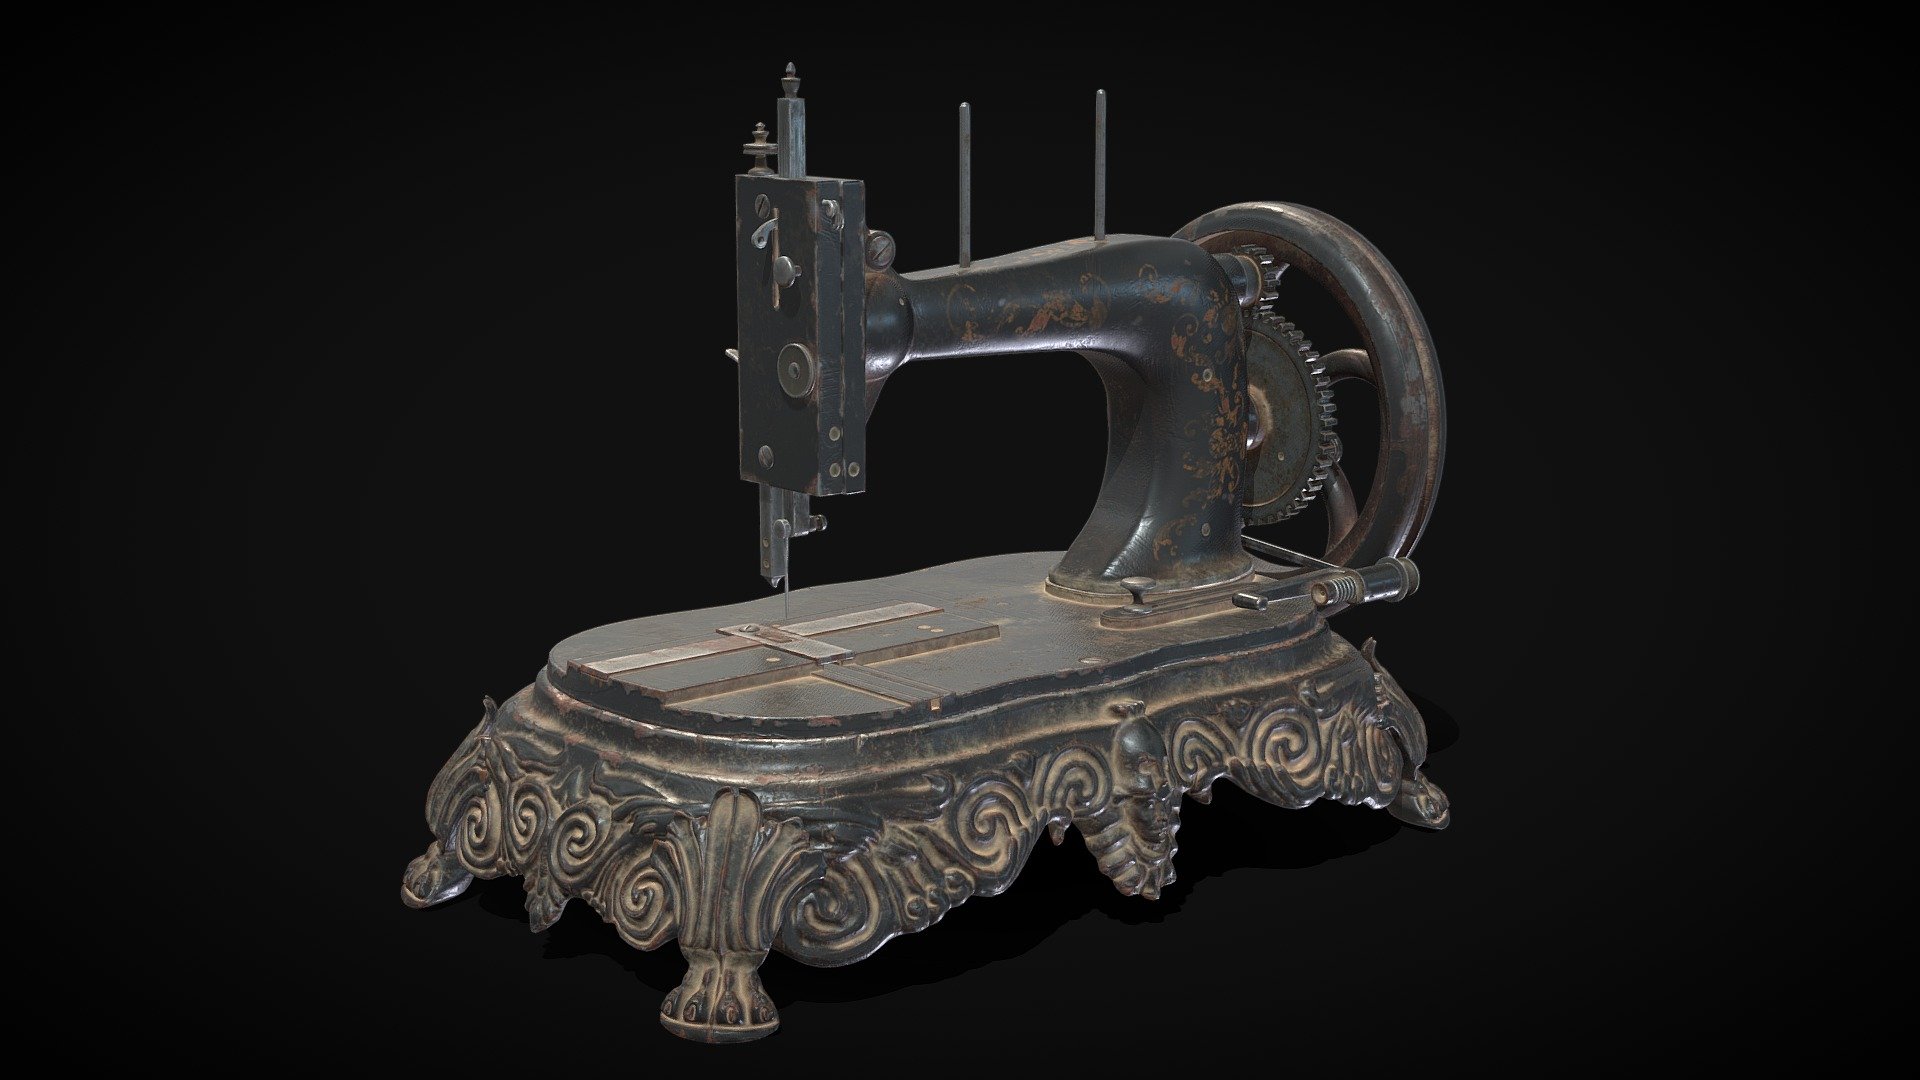 An old sewing machine. Can be used as props.
Two 4k texture sets for base and top 3d model